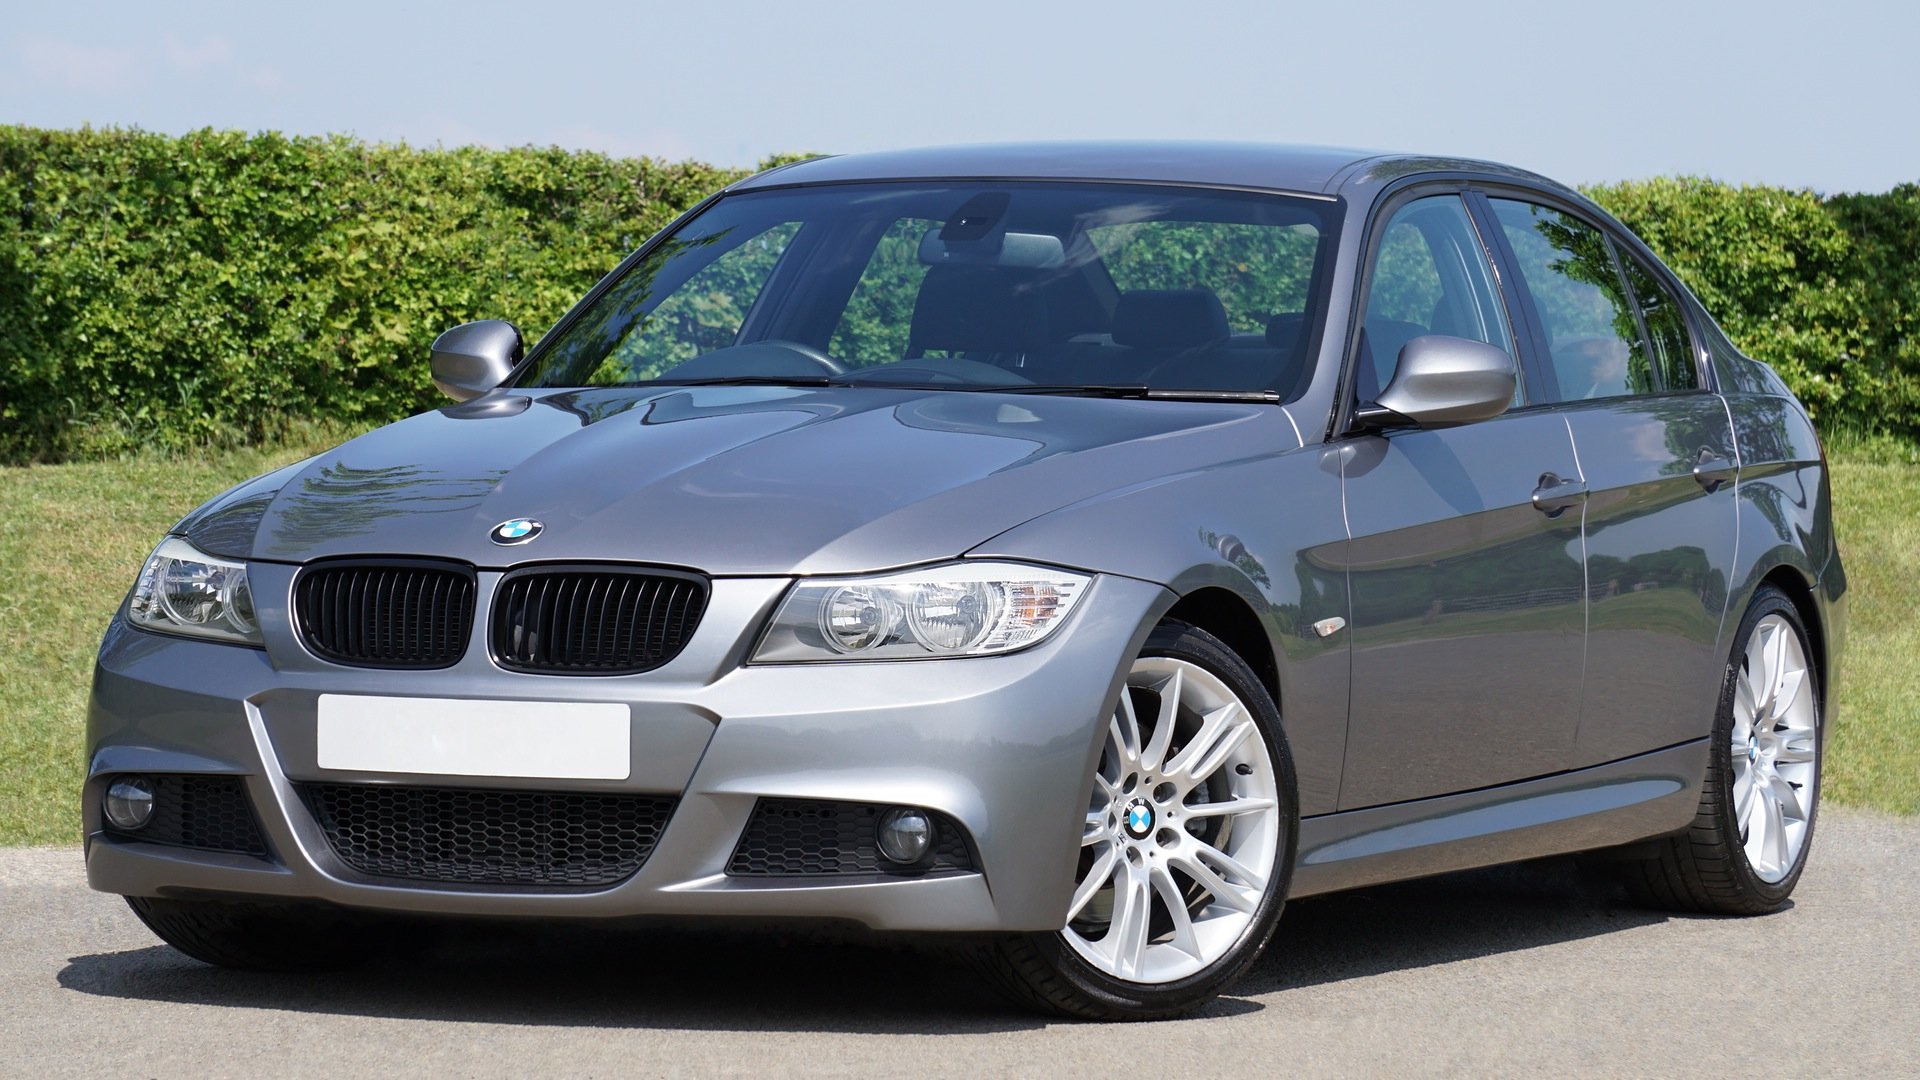 Compare BMW 3 Series Car Insurance Rates [2023]